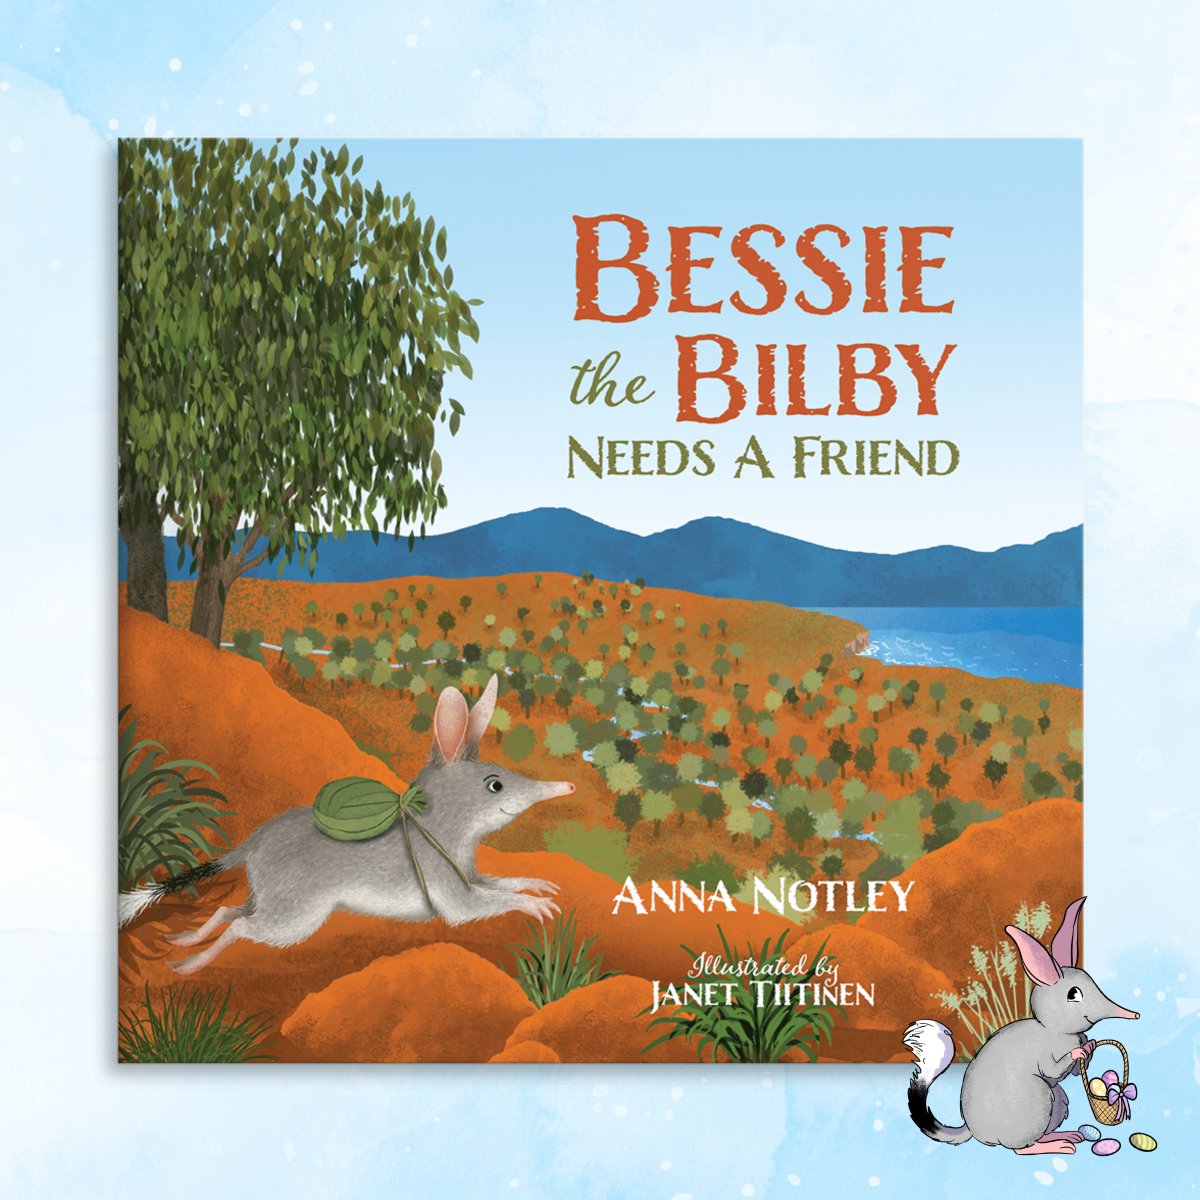 Our Easter bilby, Bessie, features in a charming picture book written by Anna Notely and Illustrated by Janet Tiitinen. Bessie the Bilby Needs a Friend explores our need for friendship with readers following Bessie on her journey to find a friend like her hubs.la/Q02rrs_z0